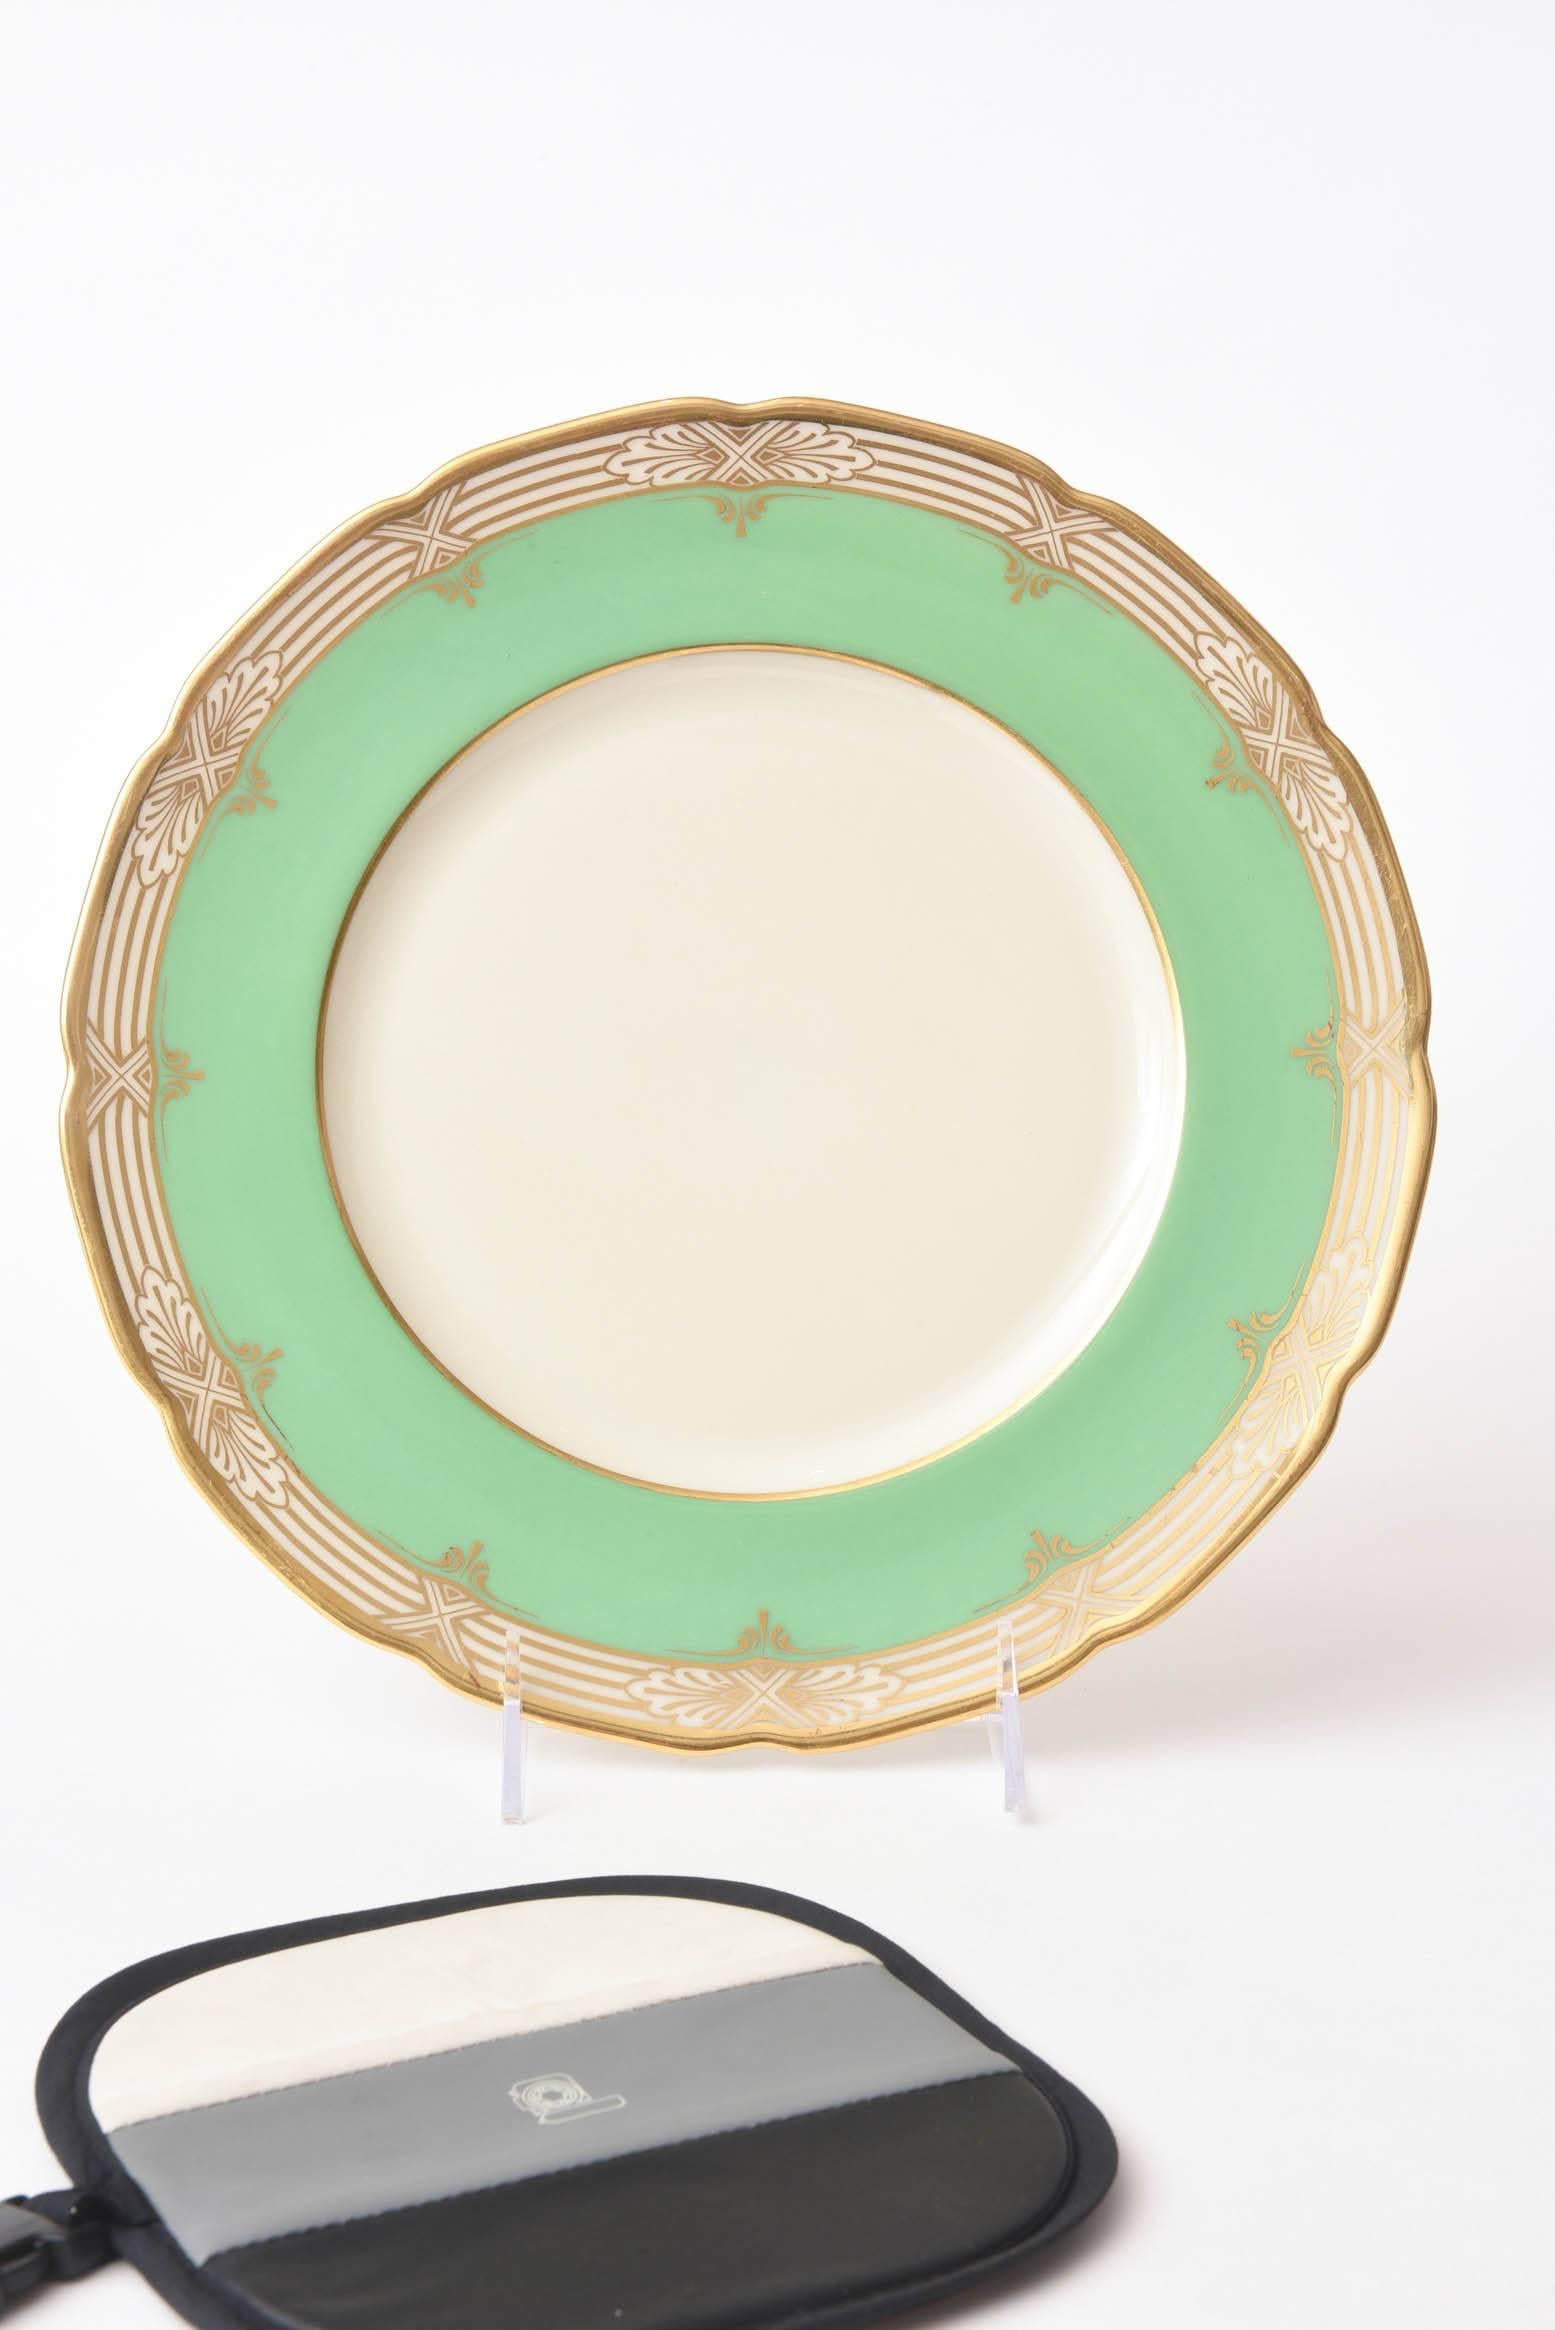 A perfect shade of green and gilt dinner plates to mix and match in for your table. A gently scalloped shape with multiple bands of gold and nice clear centres. Custom ordered through the fine retailer of Marshall Fields, Chicago and made by Lenox.